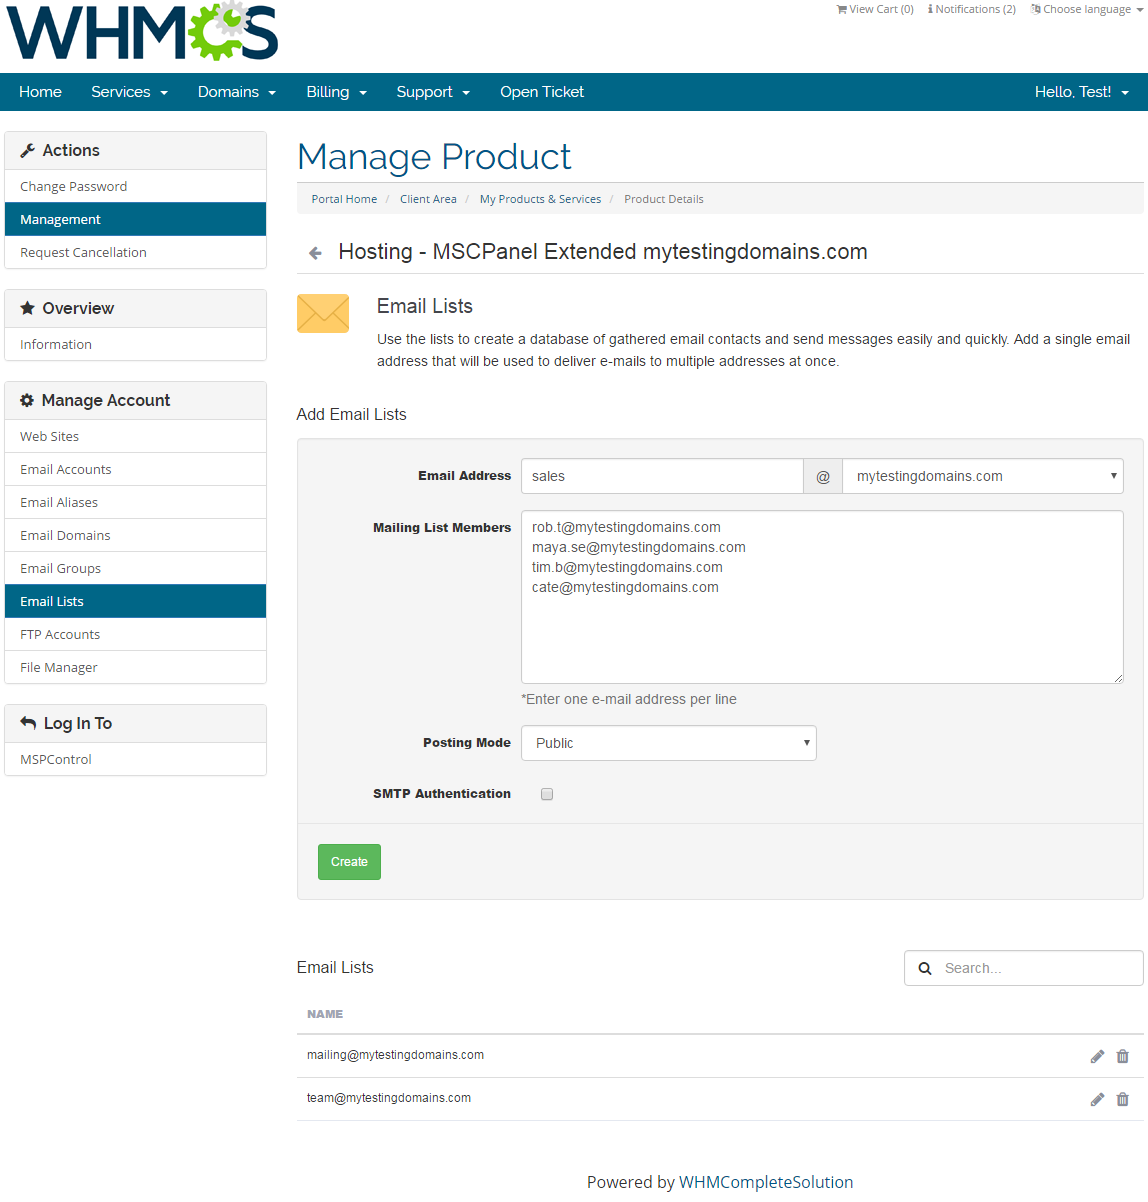 MSPControl Extended For WHMCS: Screen 6